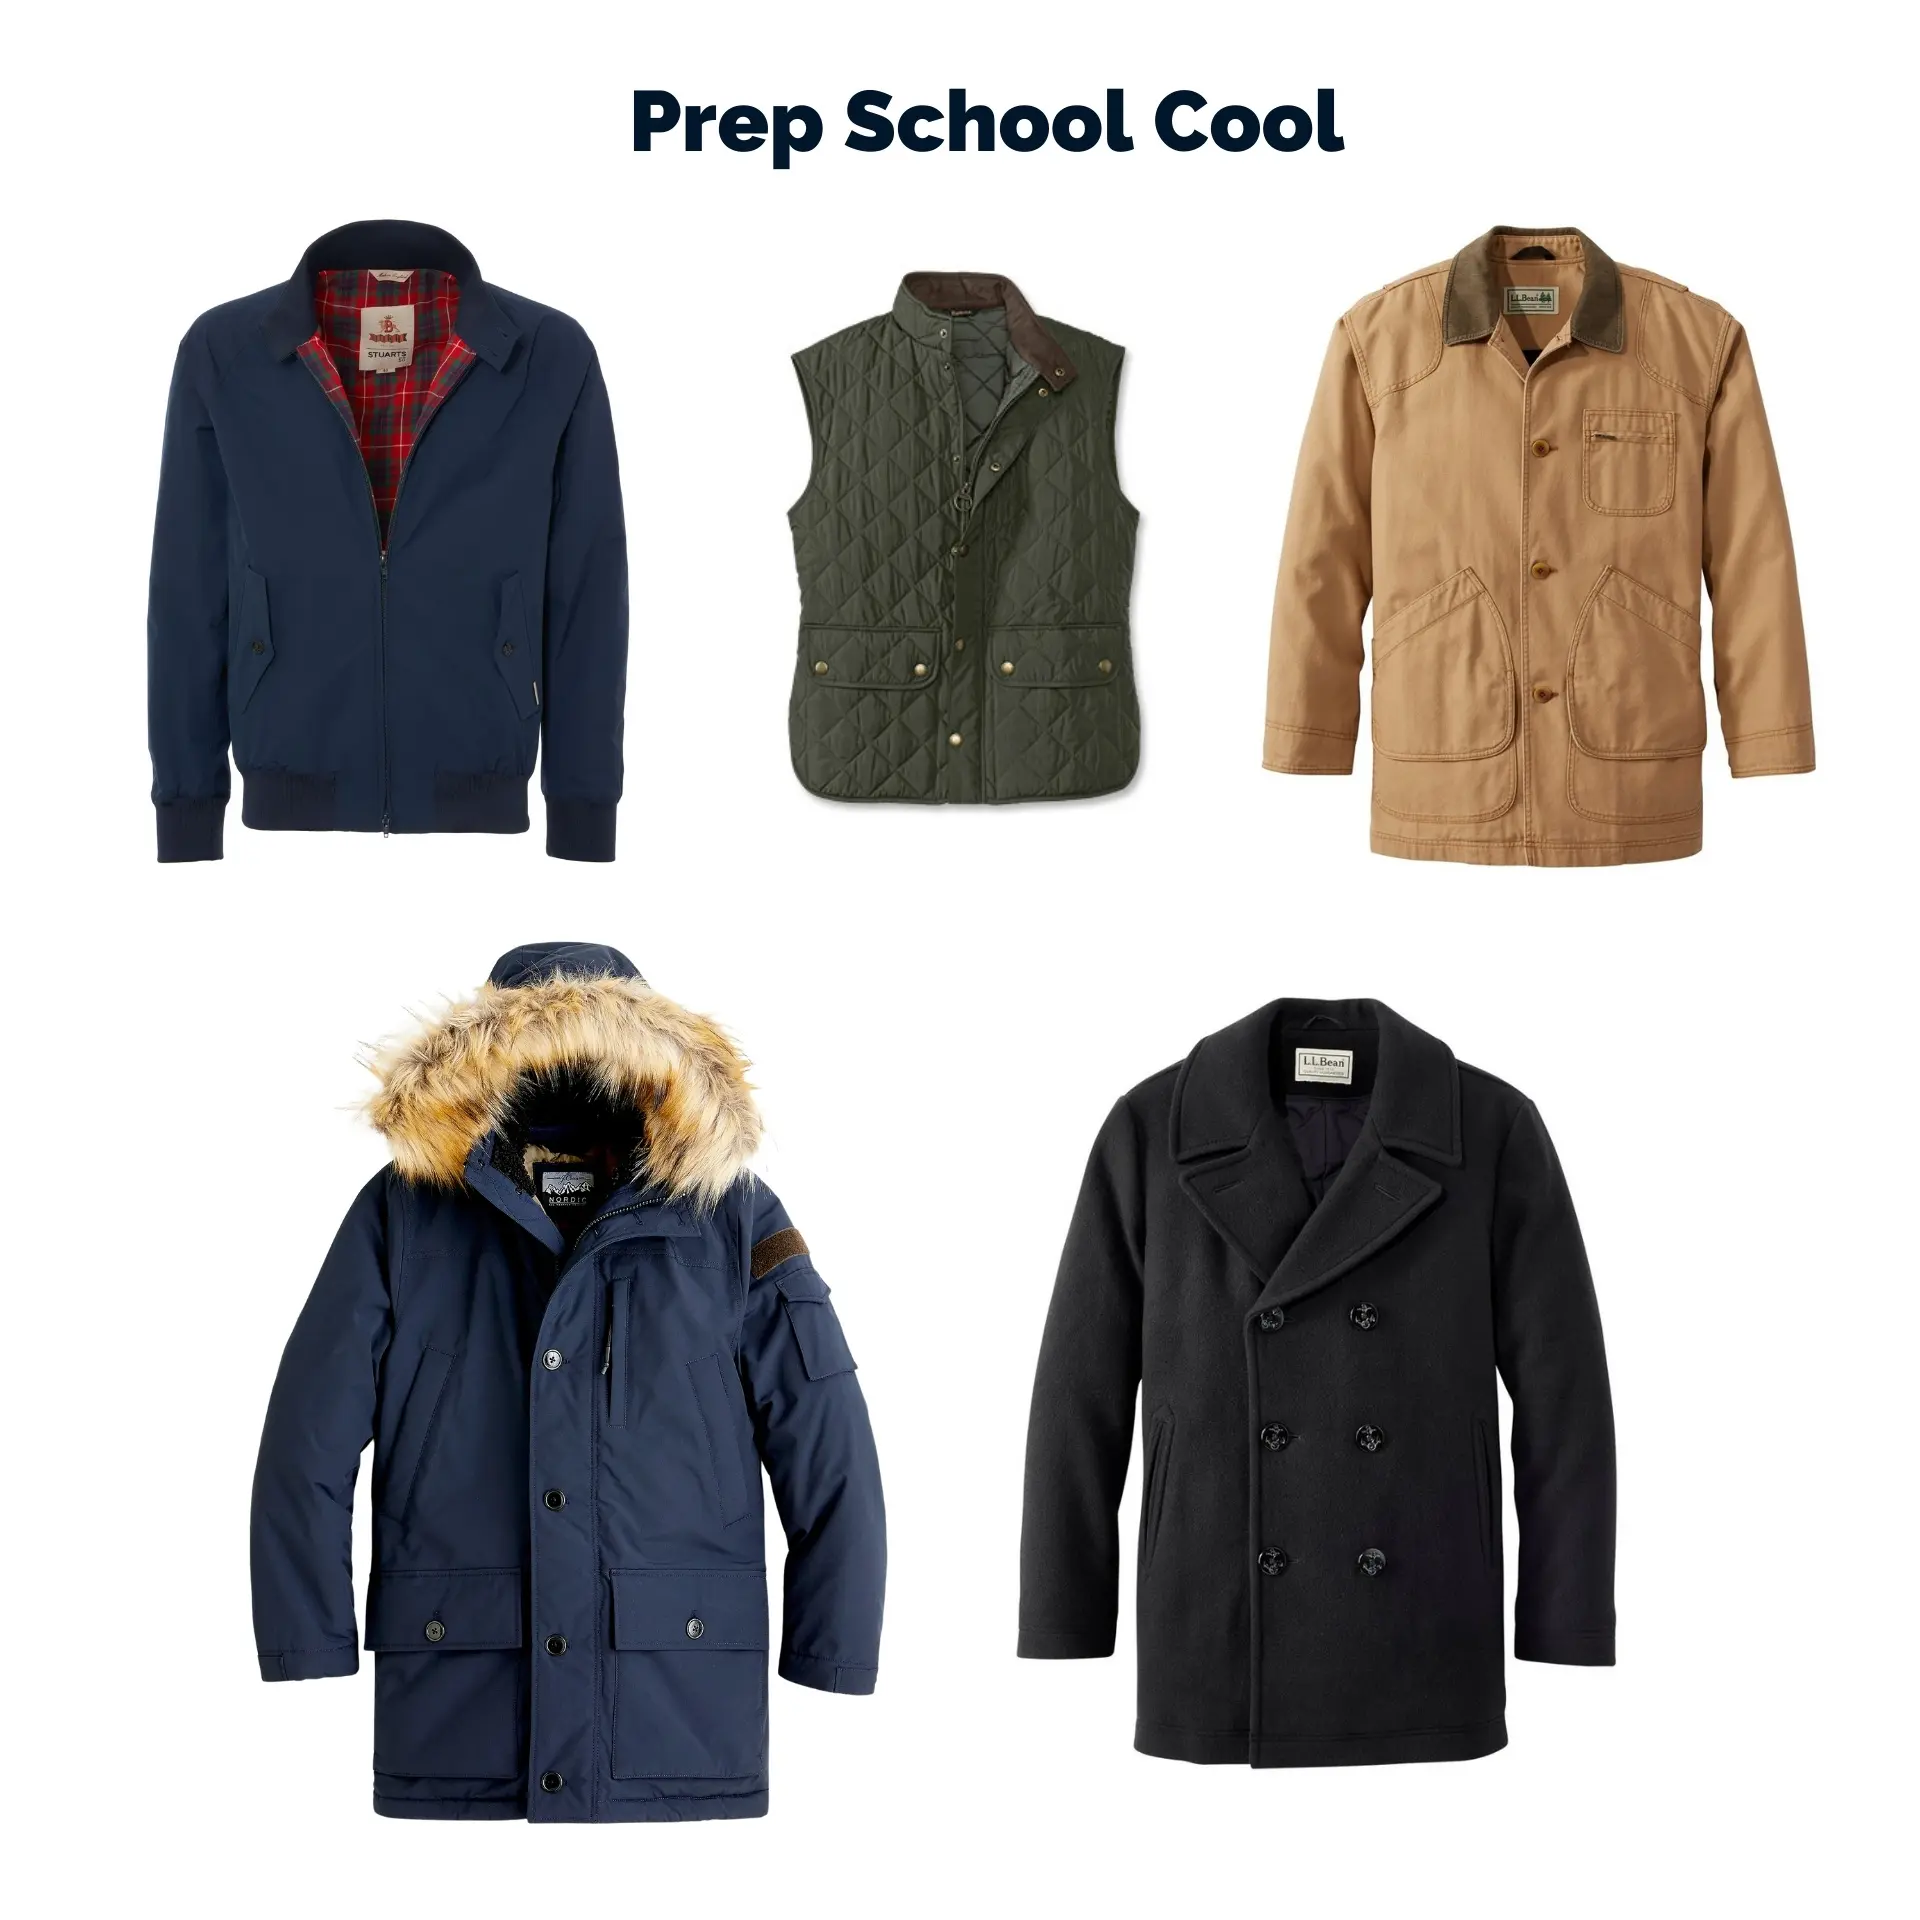 Outerwear collection Prep School Cool